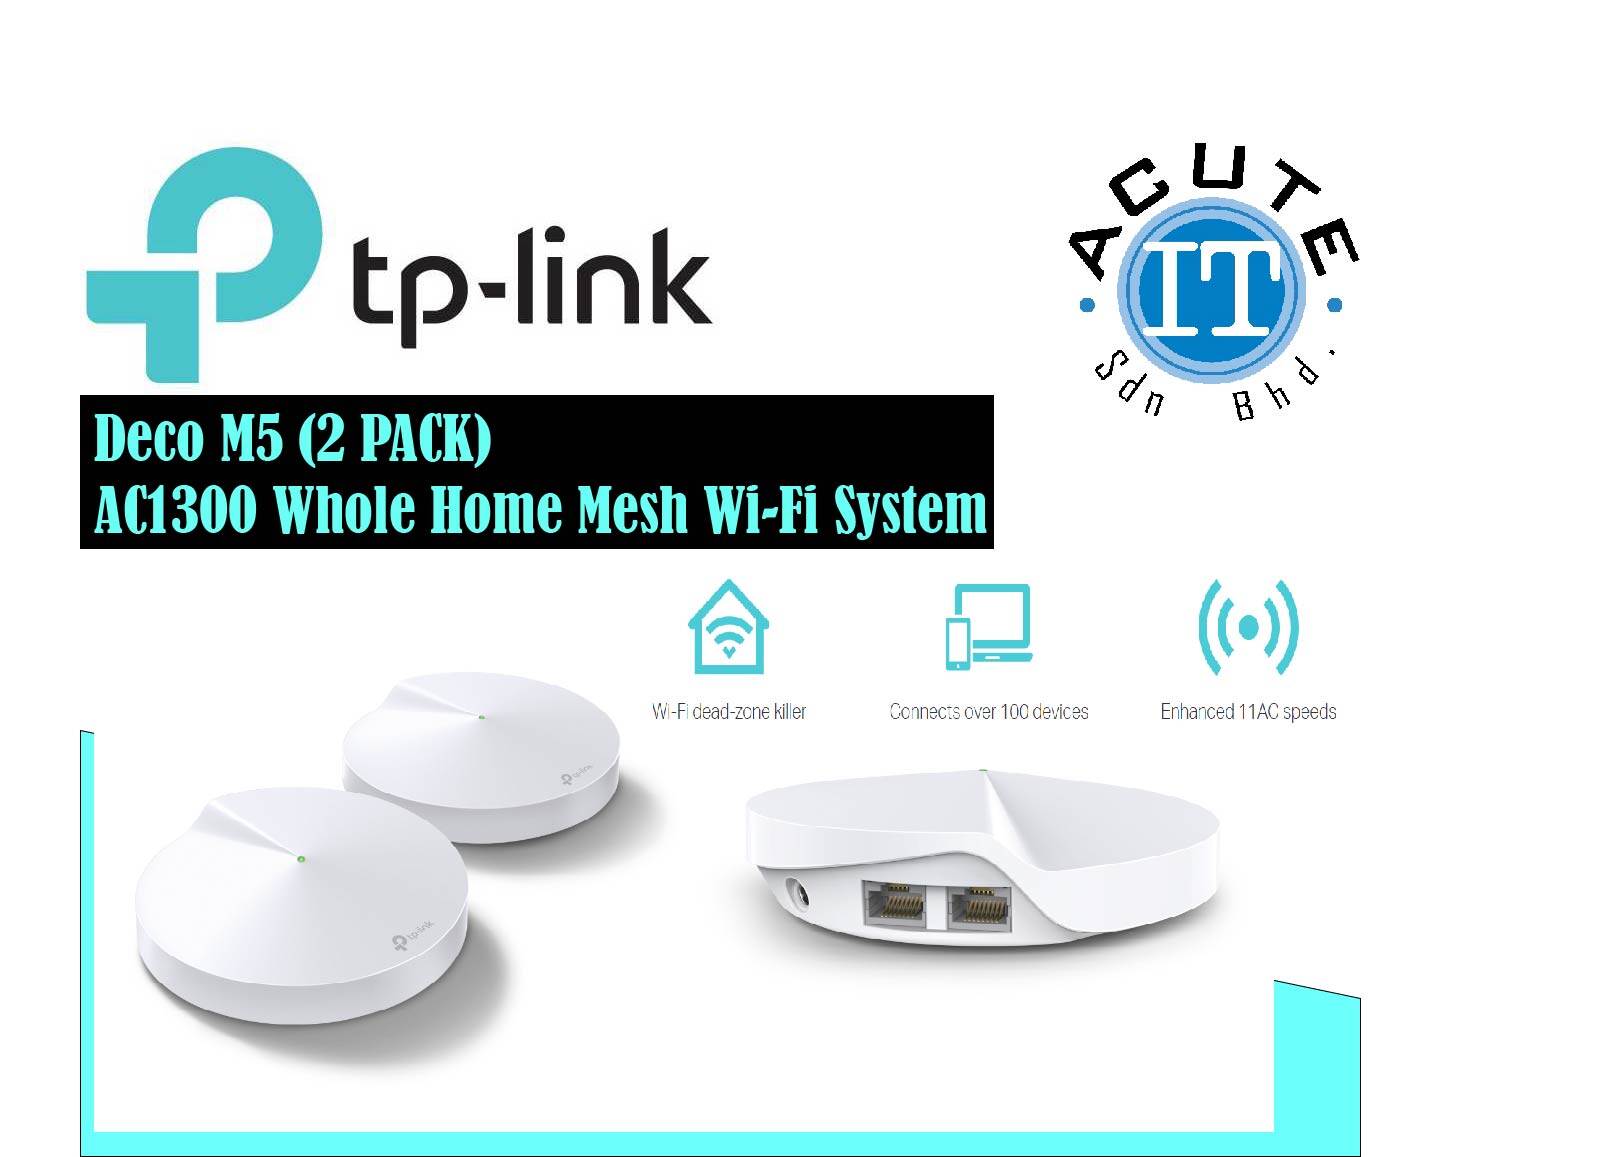 TP-LINK Deco M5 (2 PACKS) AC1300 Whole Home Mesh Wi-Fi System | Lazada